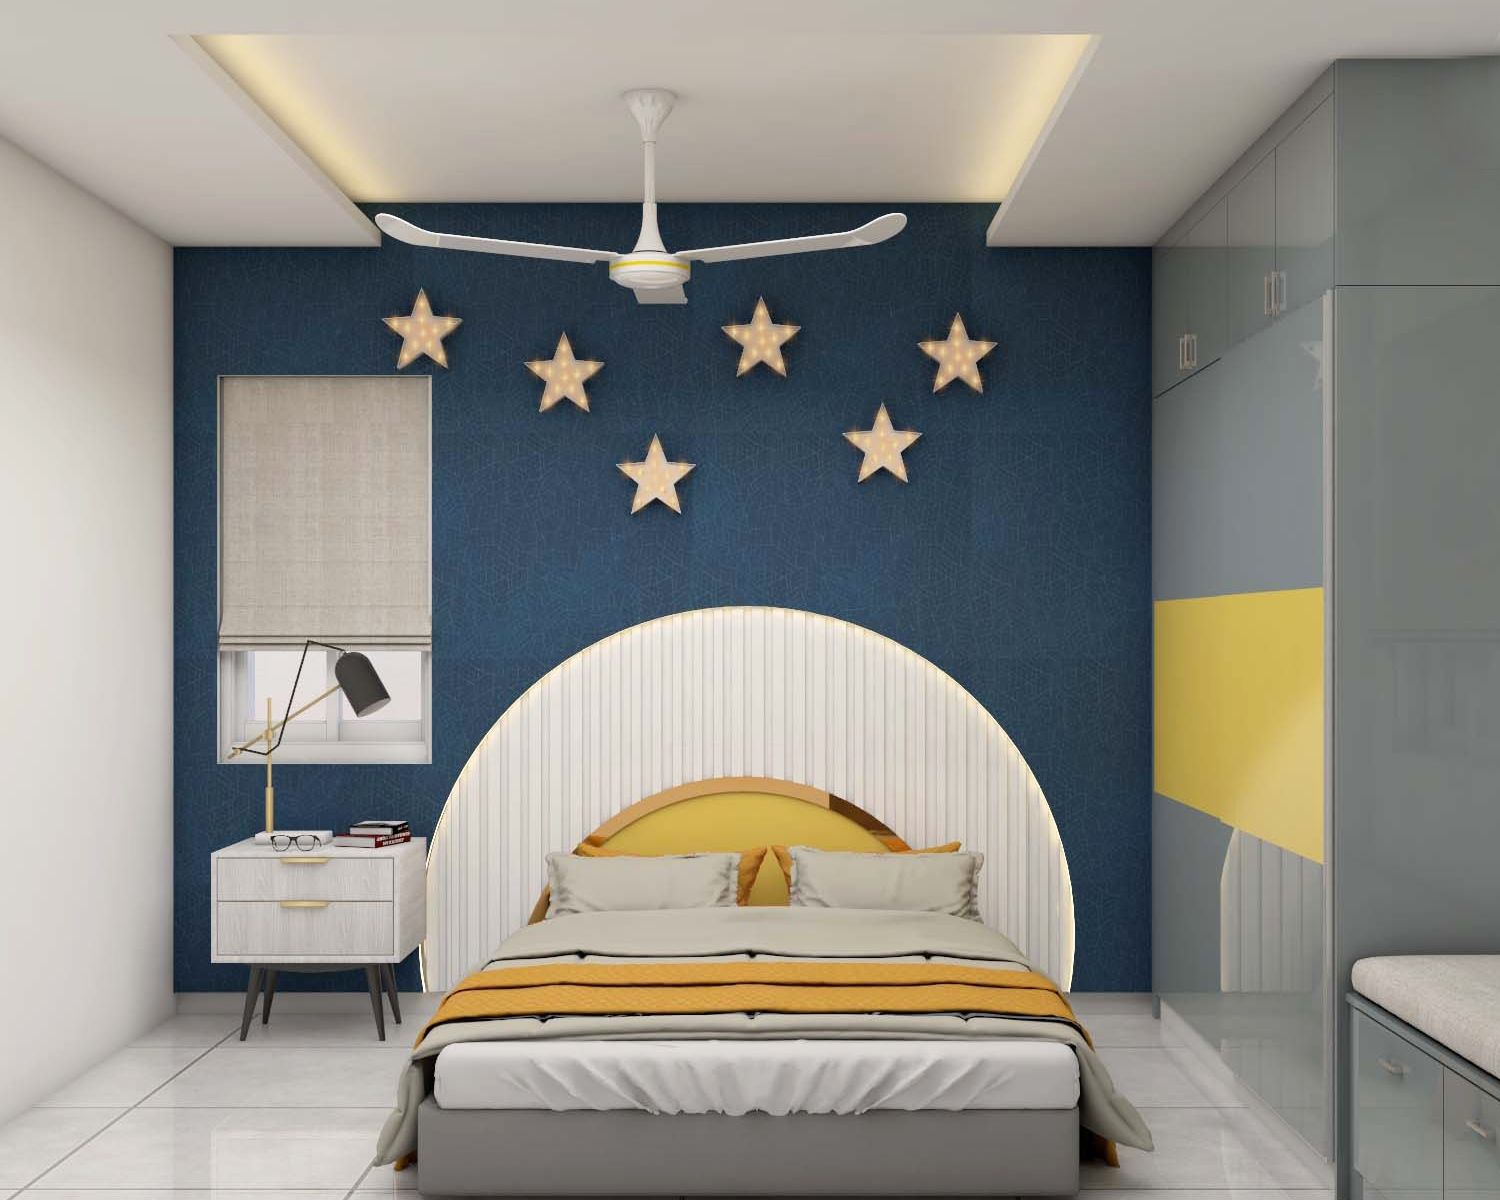 Contemporary Boys Room Design With Dark Blue Accent Wall And Star Decor